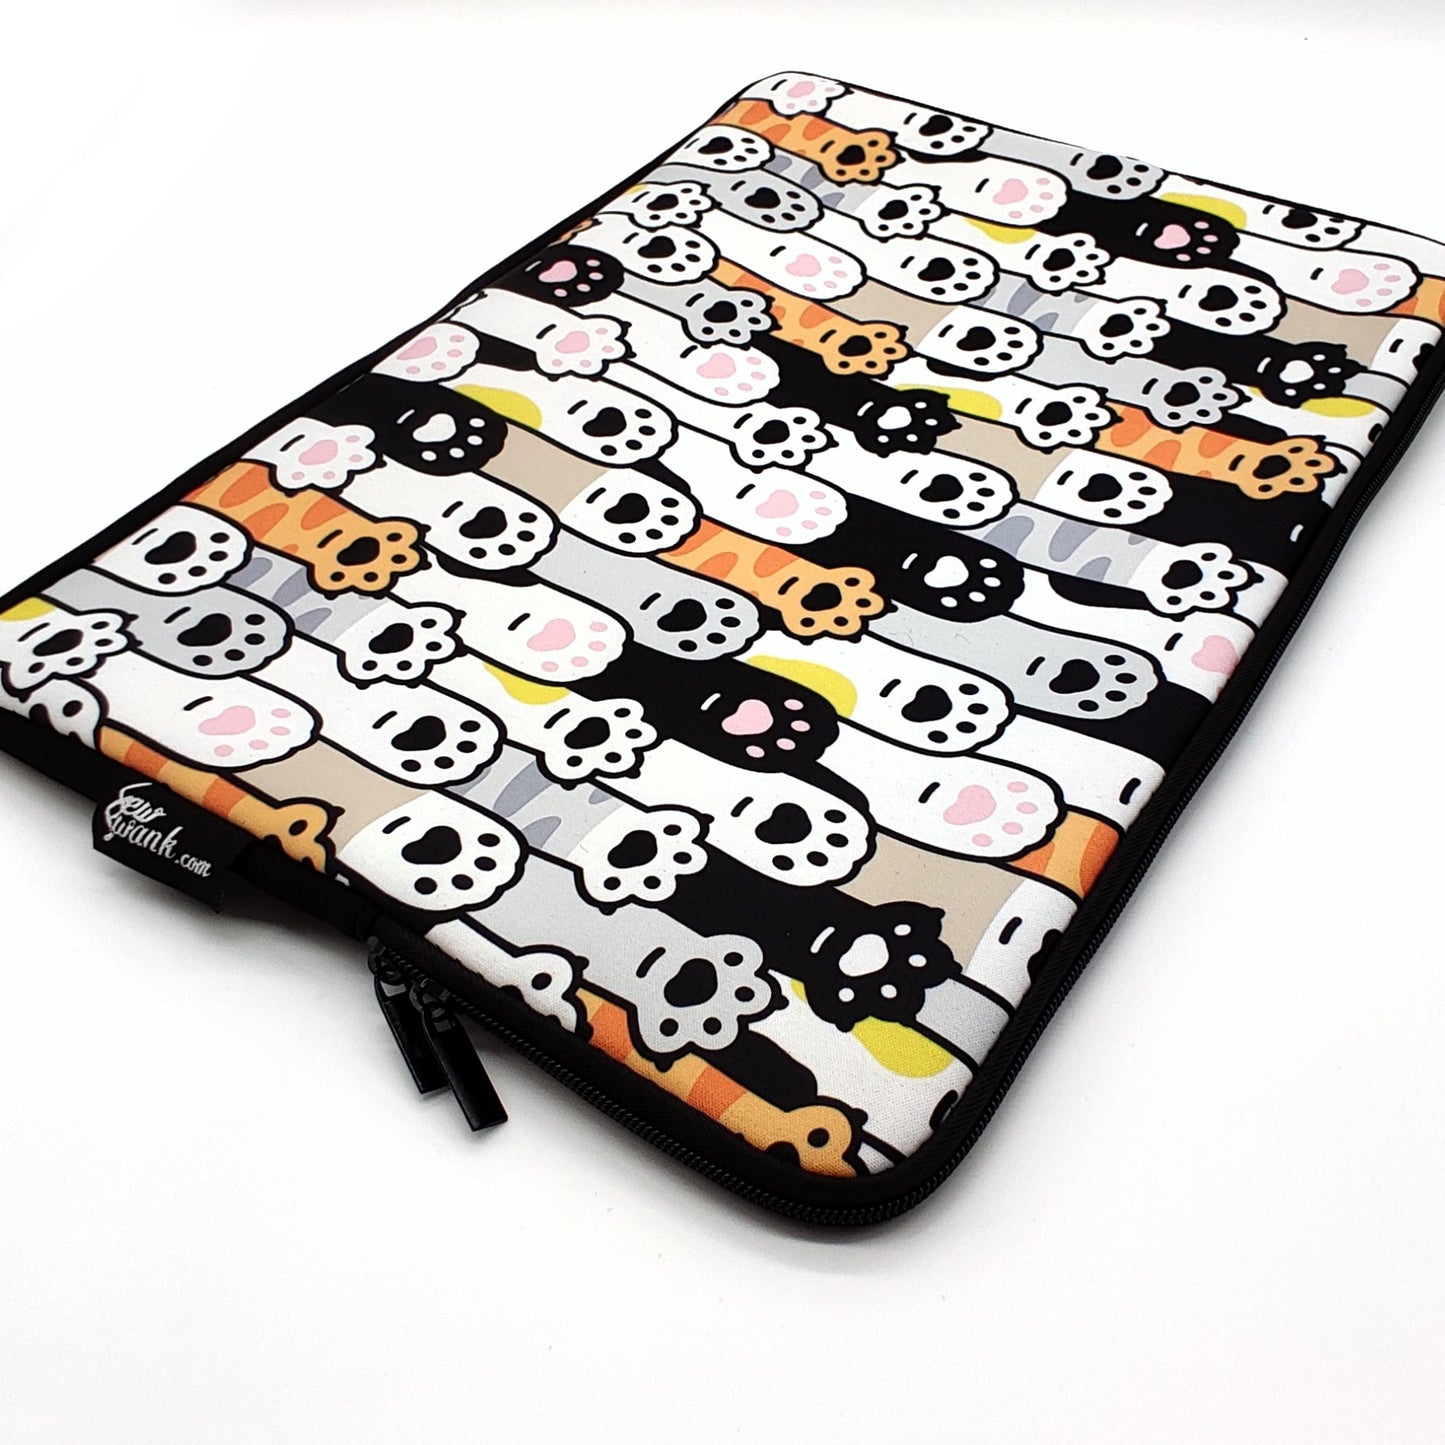 13-15 Inch Cat Paws Print Laptop Sleeve